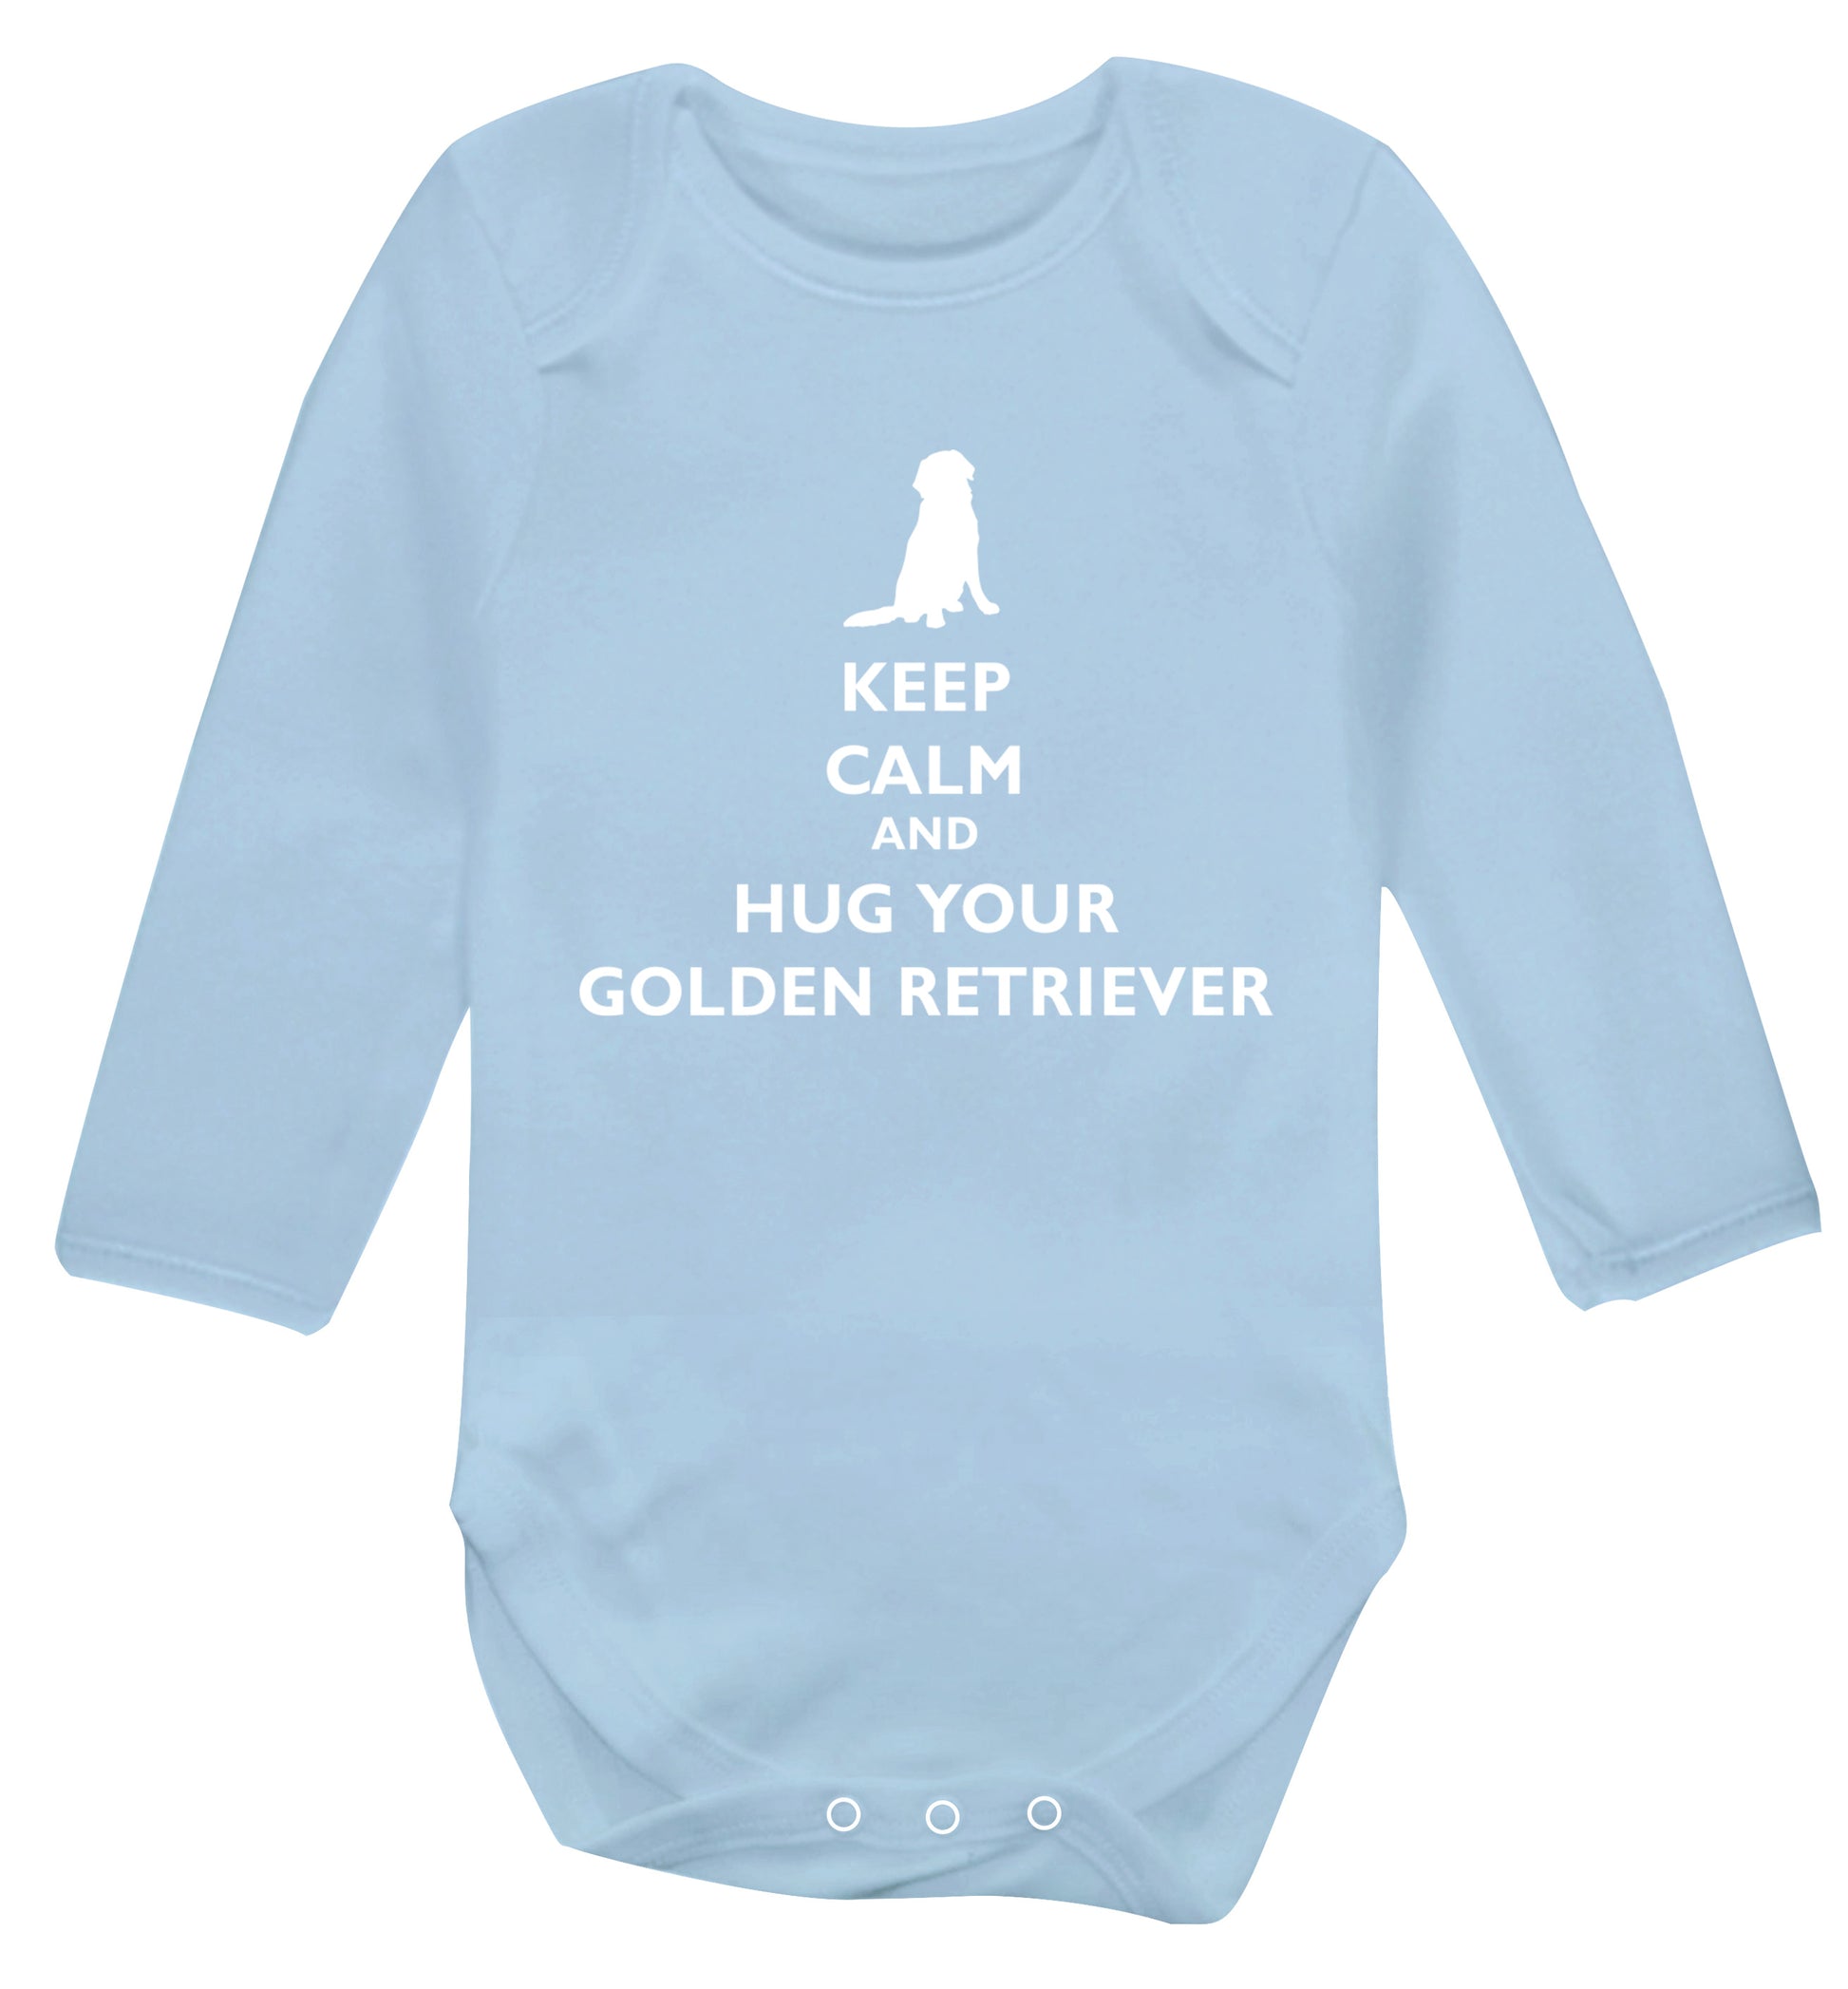 Keep calm and hug your golden retriever Baby Vest long sleeved pale blue 6-12 months